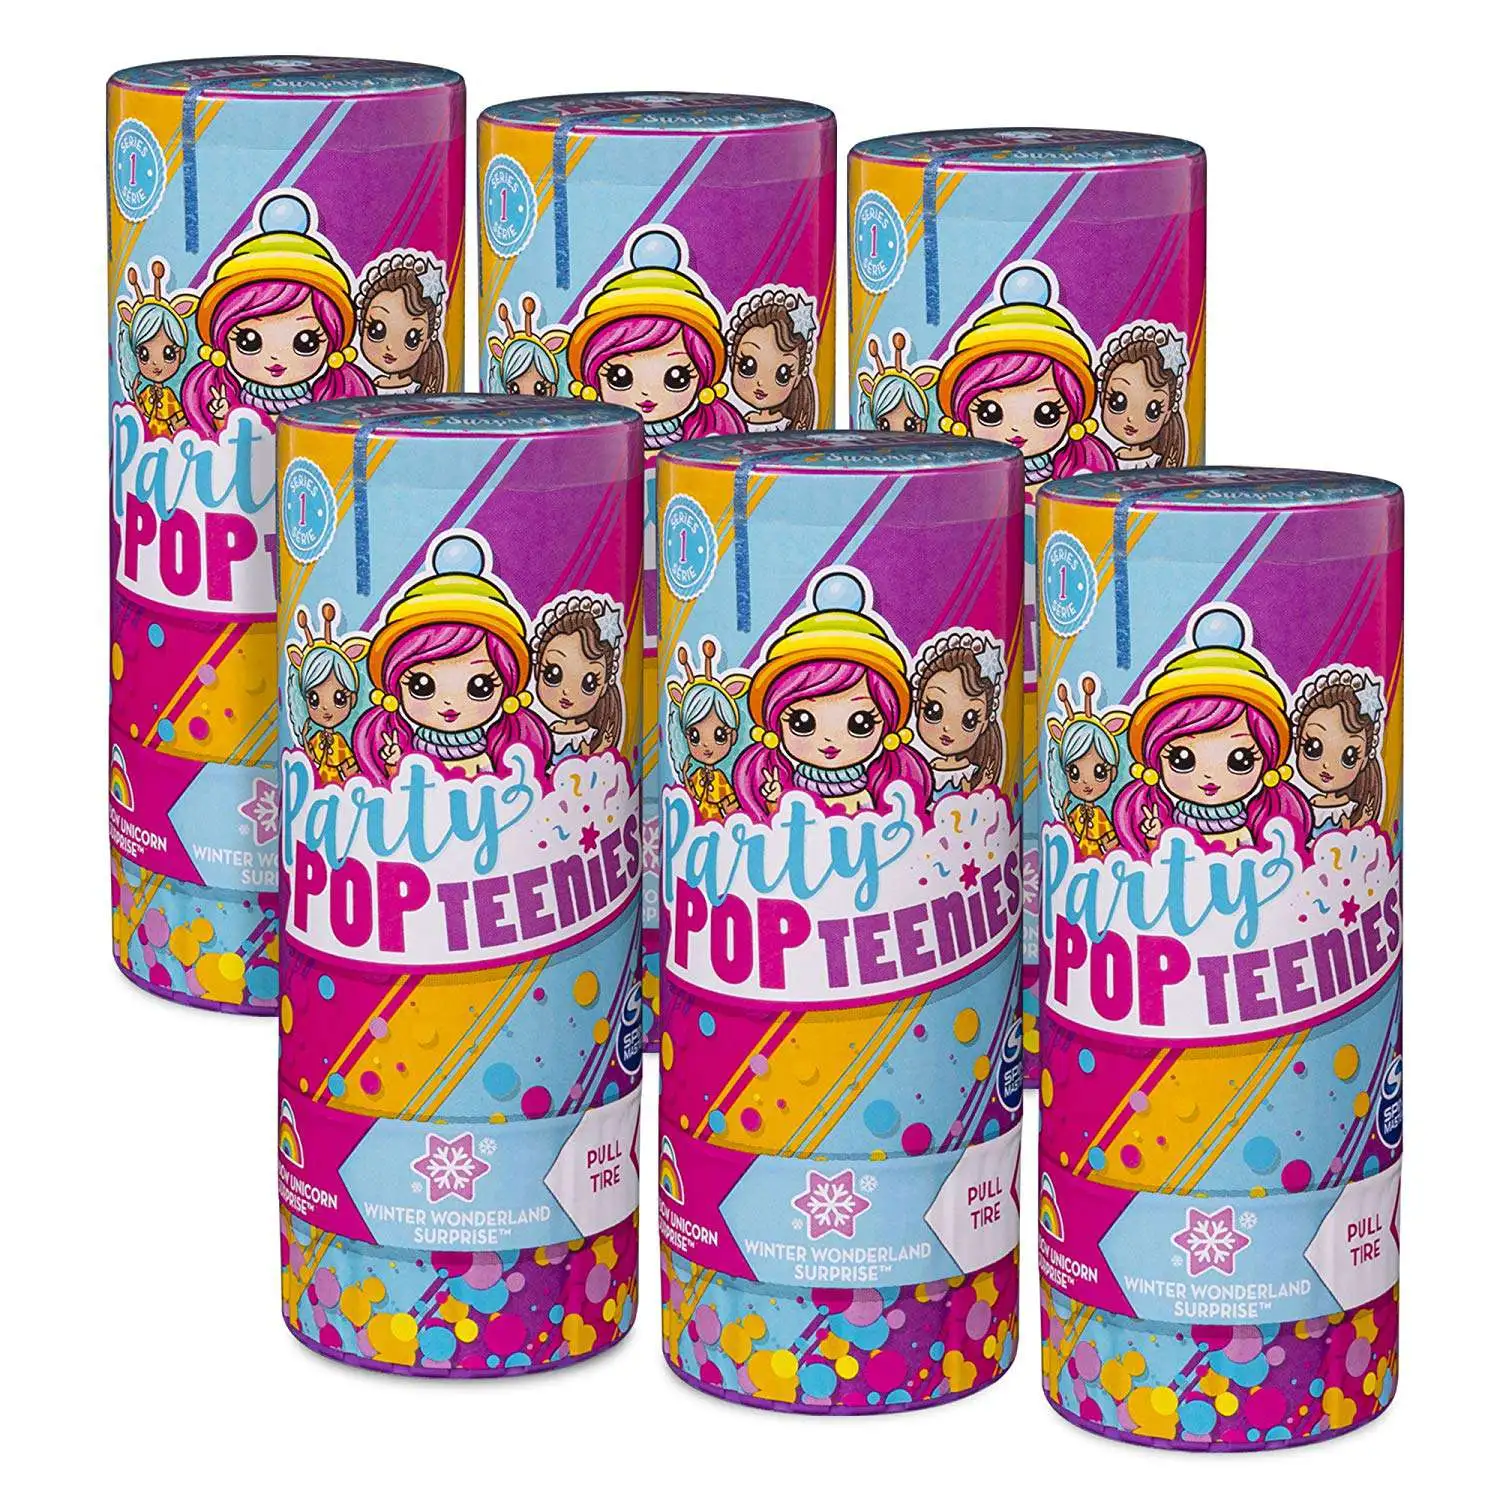 Series 1 Lot of 6 Party POPTEENIES Brand New Sealed Surprise Poppers 